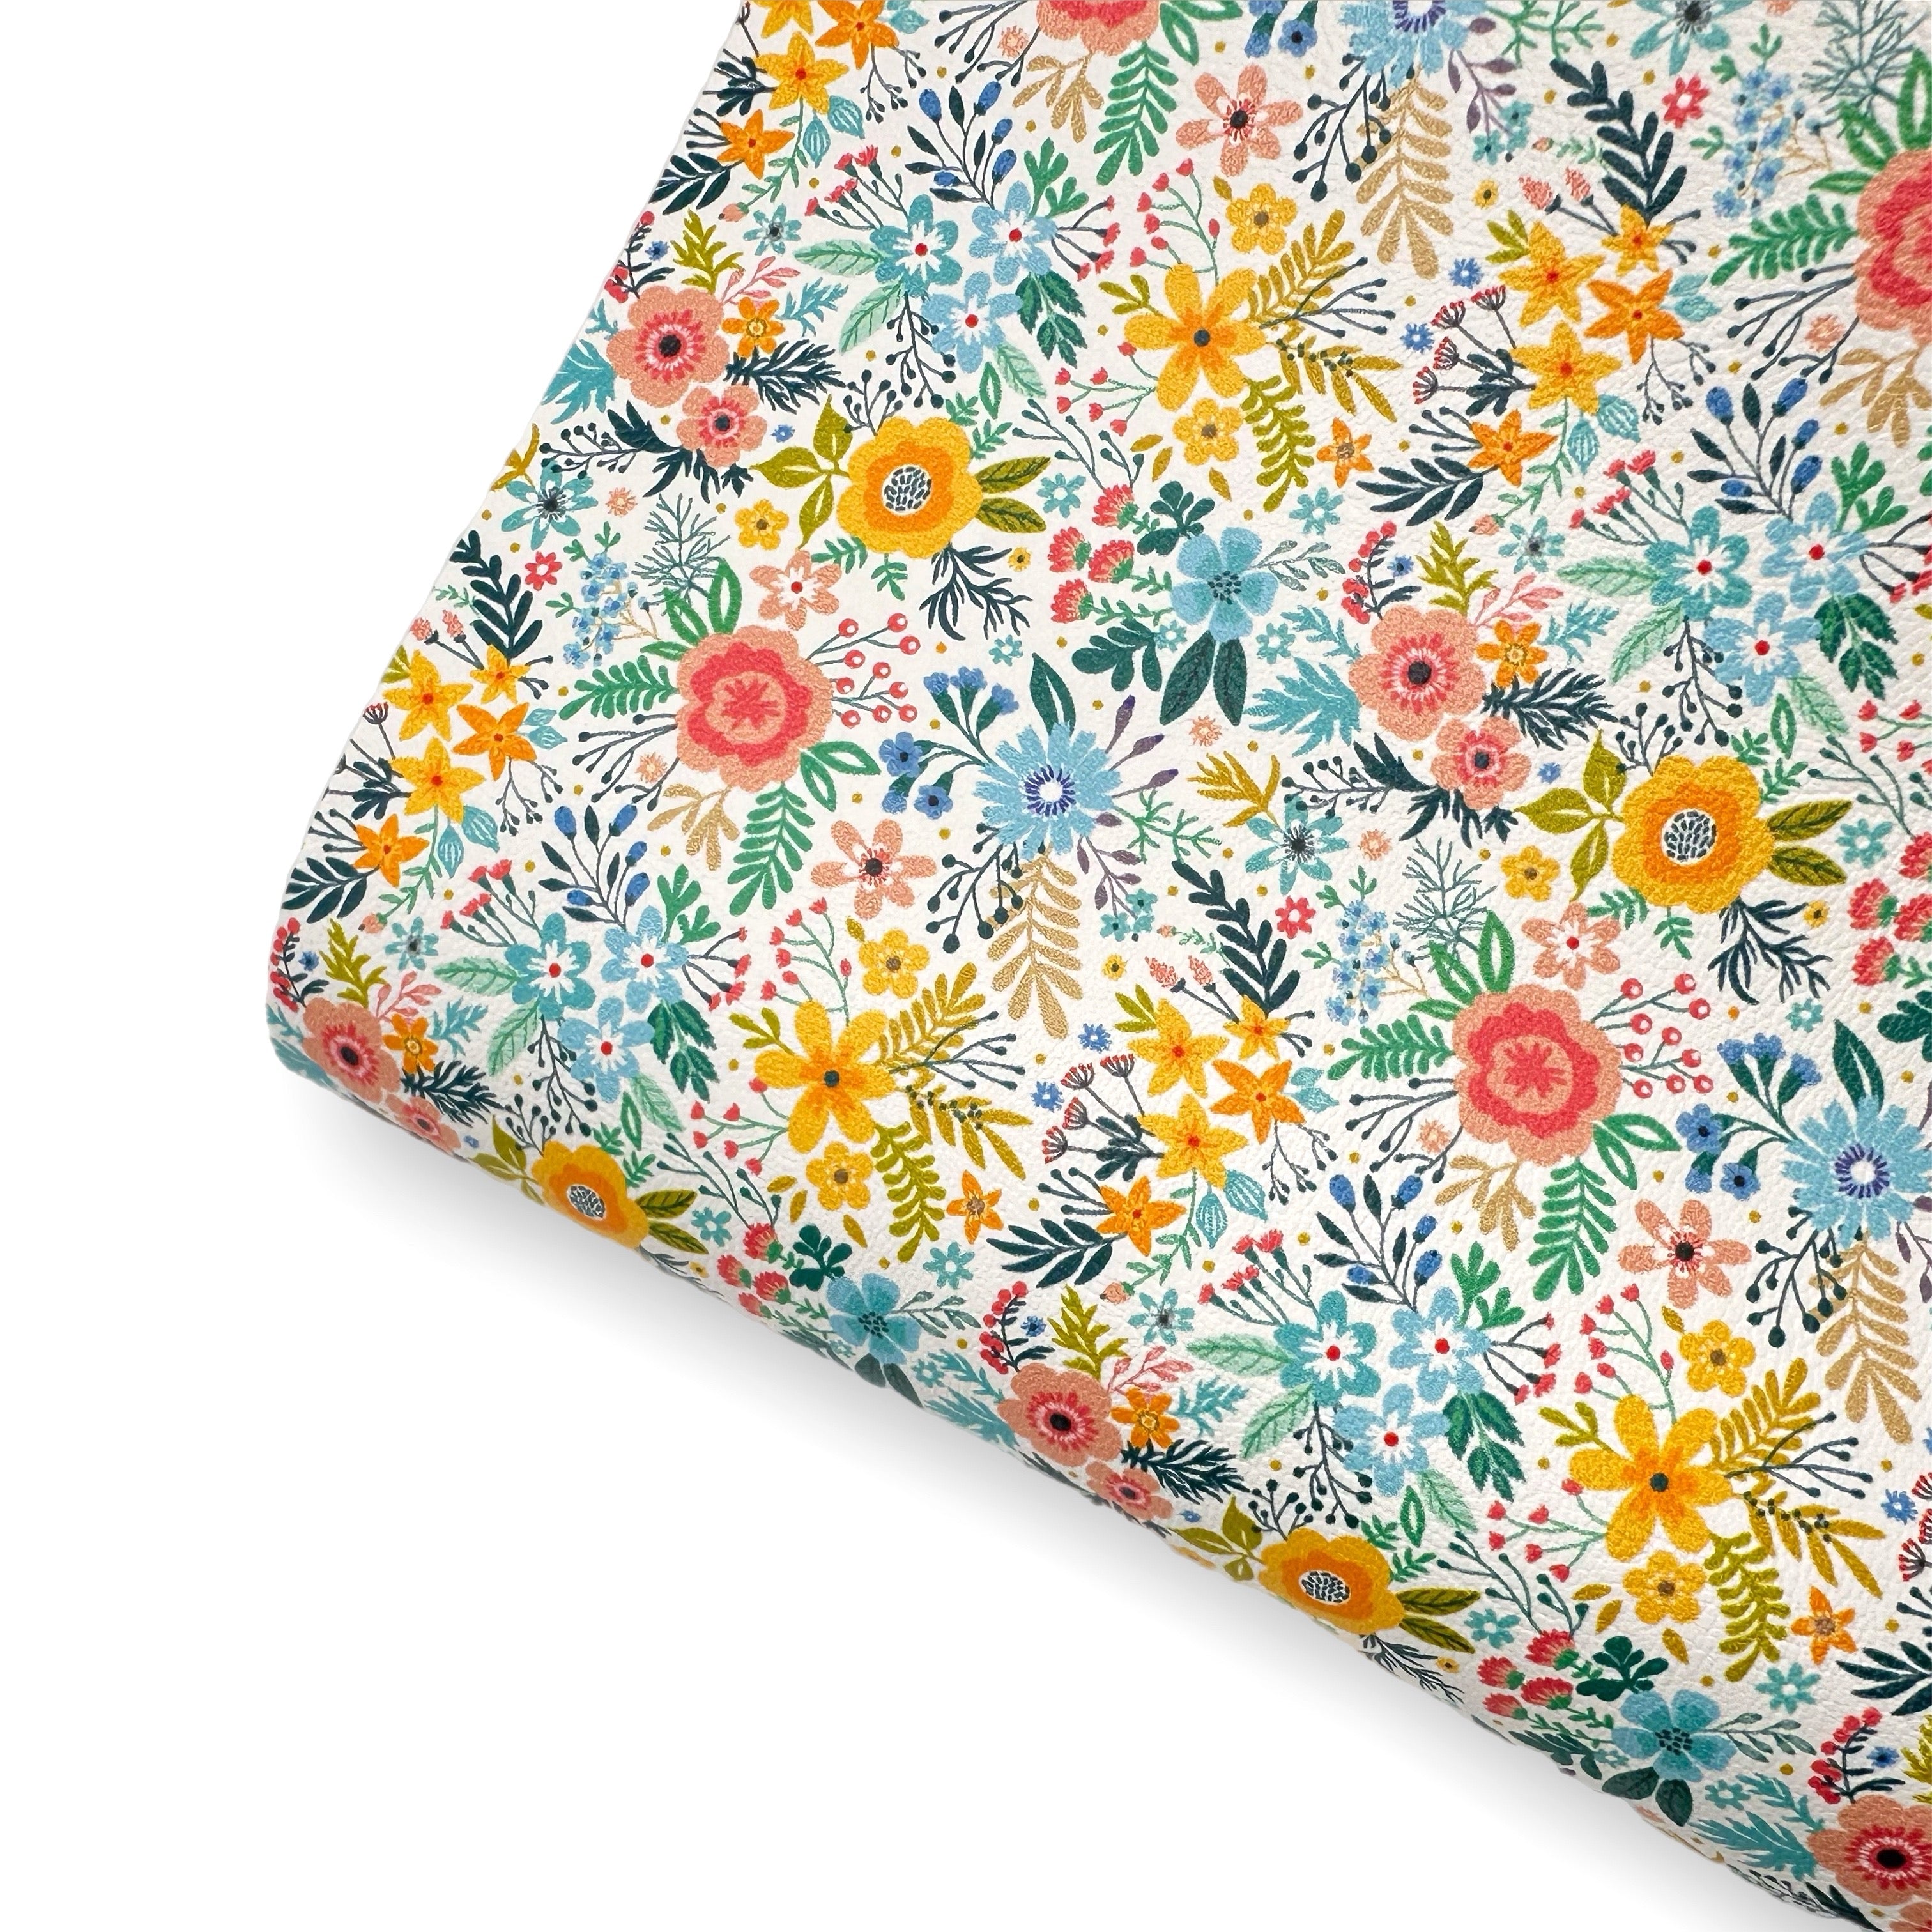 Pretty Summer Meadow Premium Faux Leather Fabric